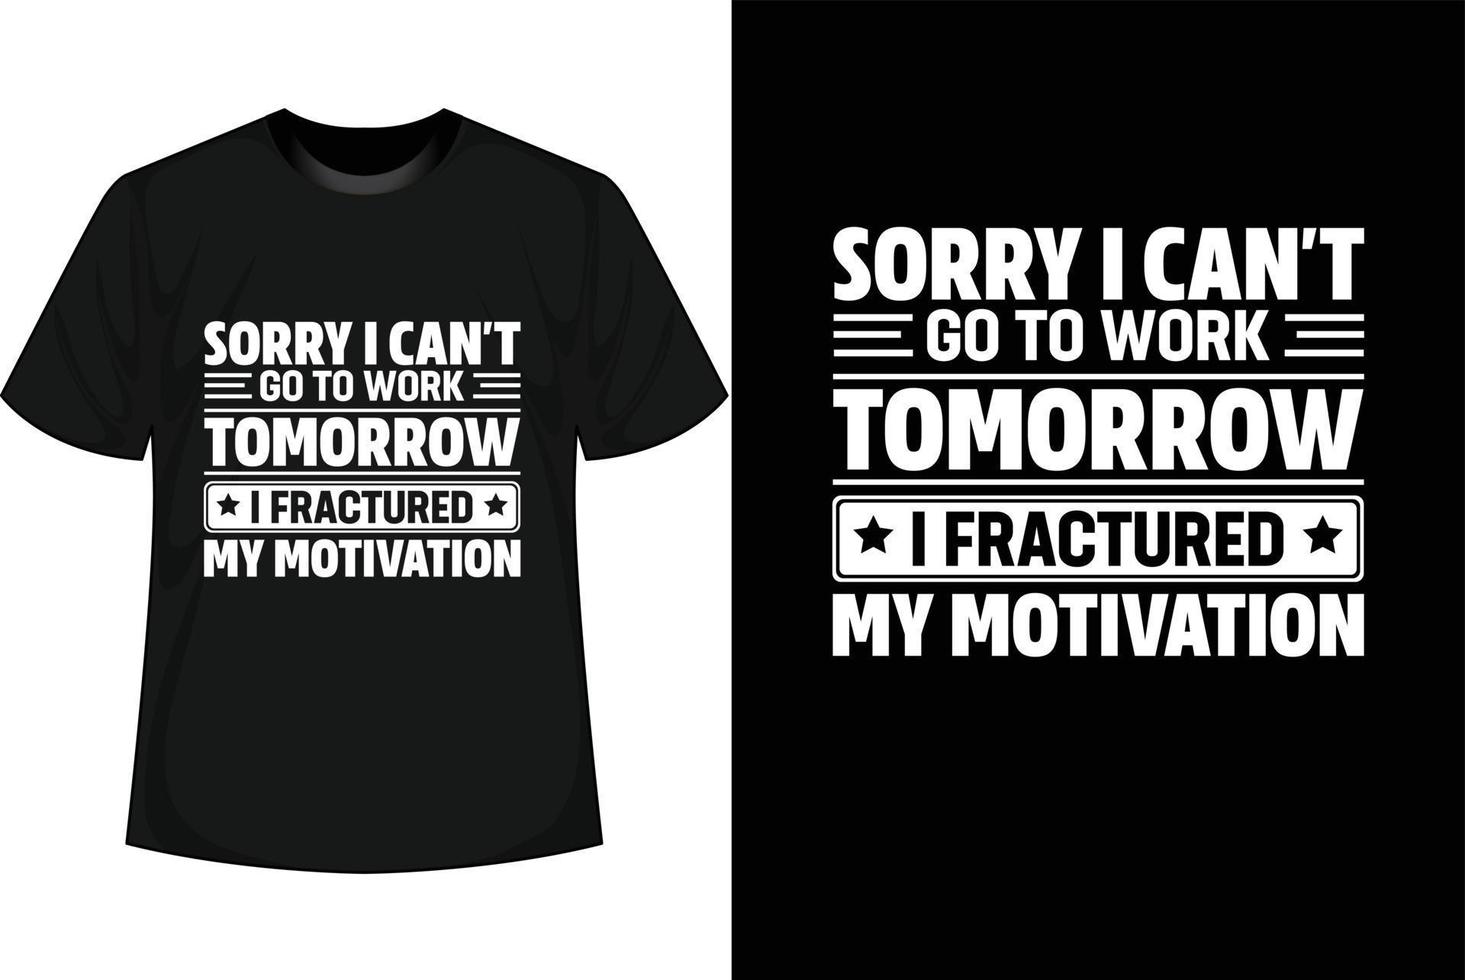 SORRY I CAN'T GO TO WORK TOMORROW I FRACTURED MY MOTIVATION Motivational T shirt Design vector